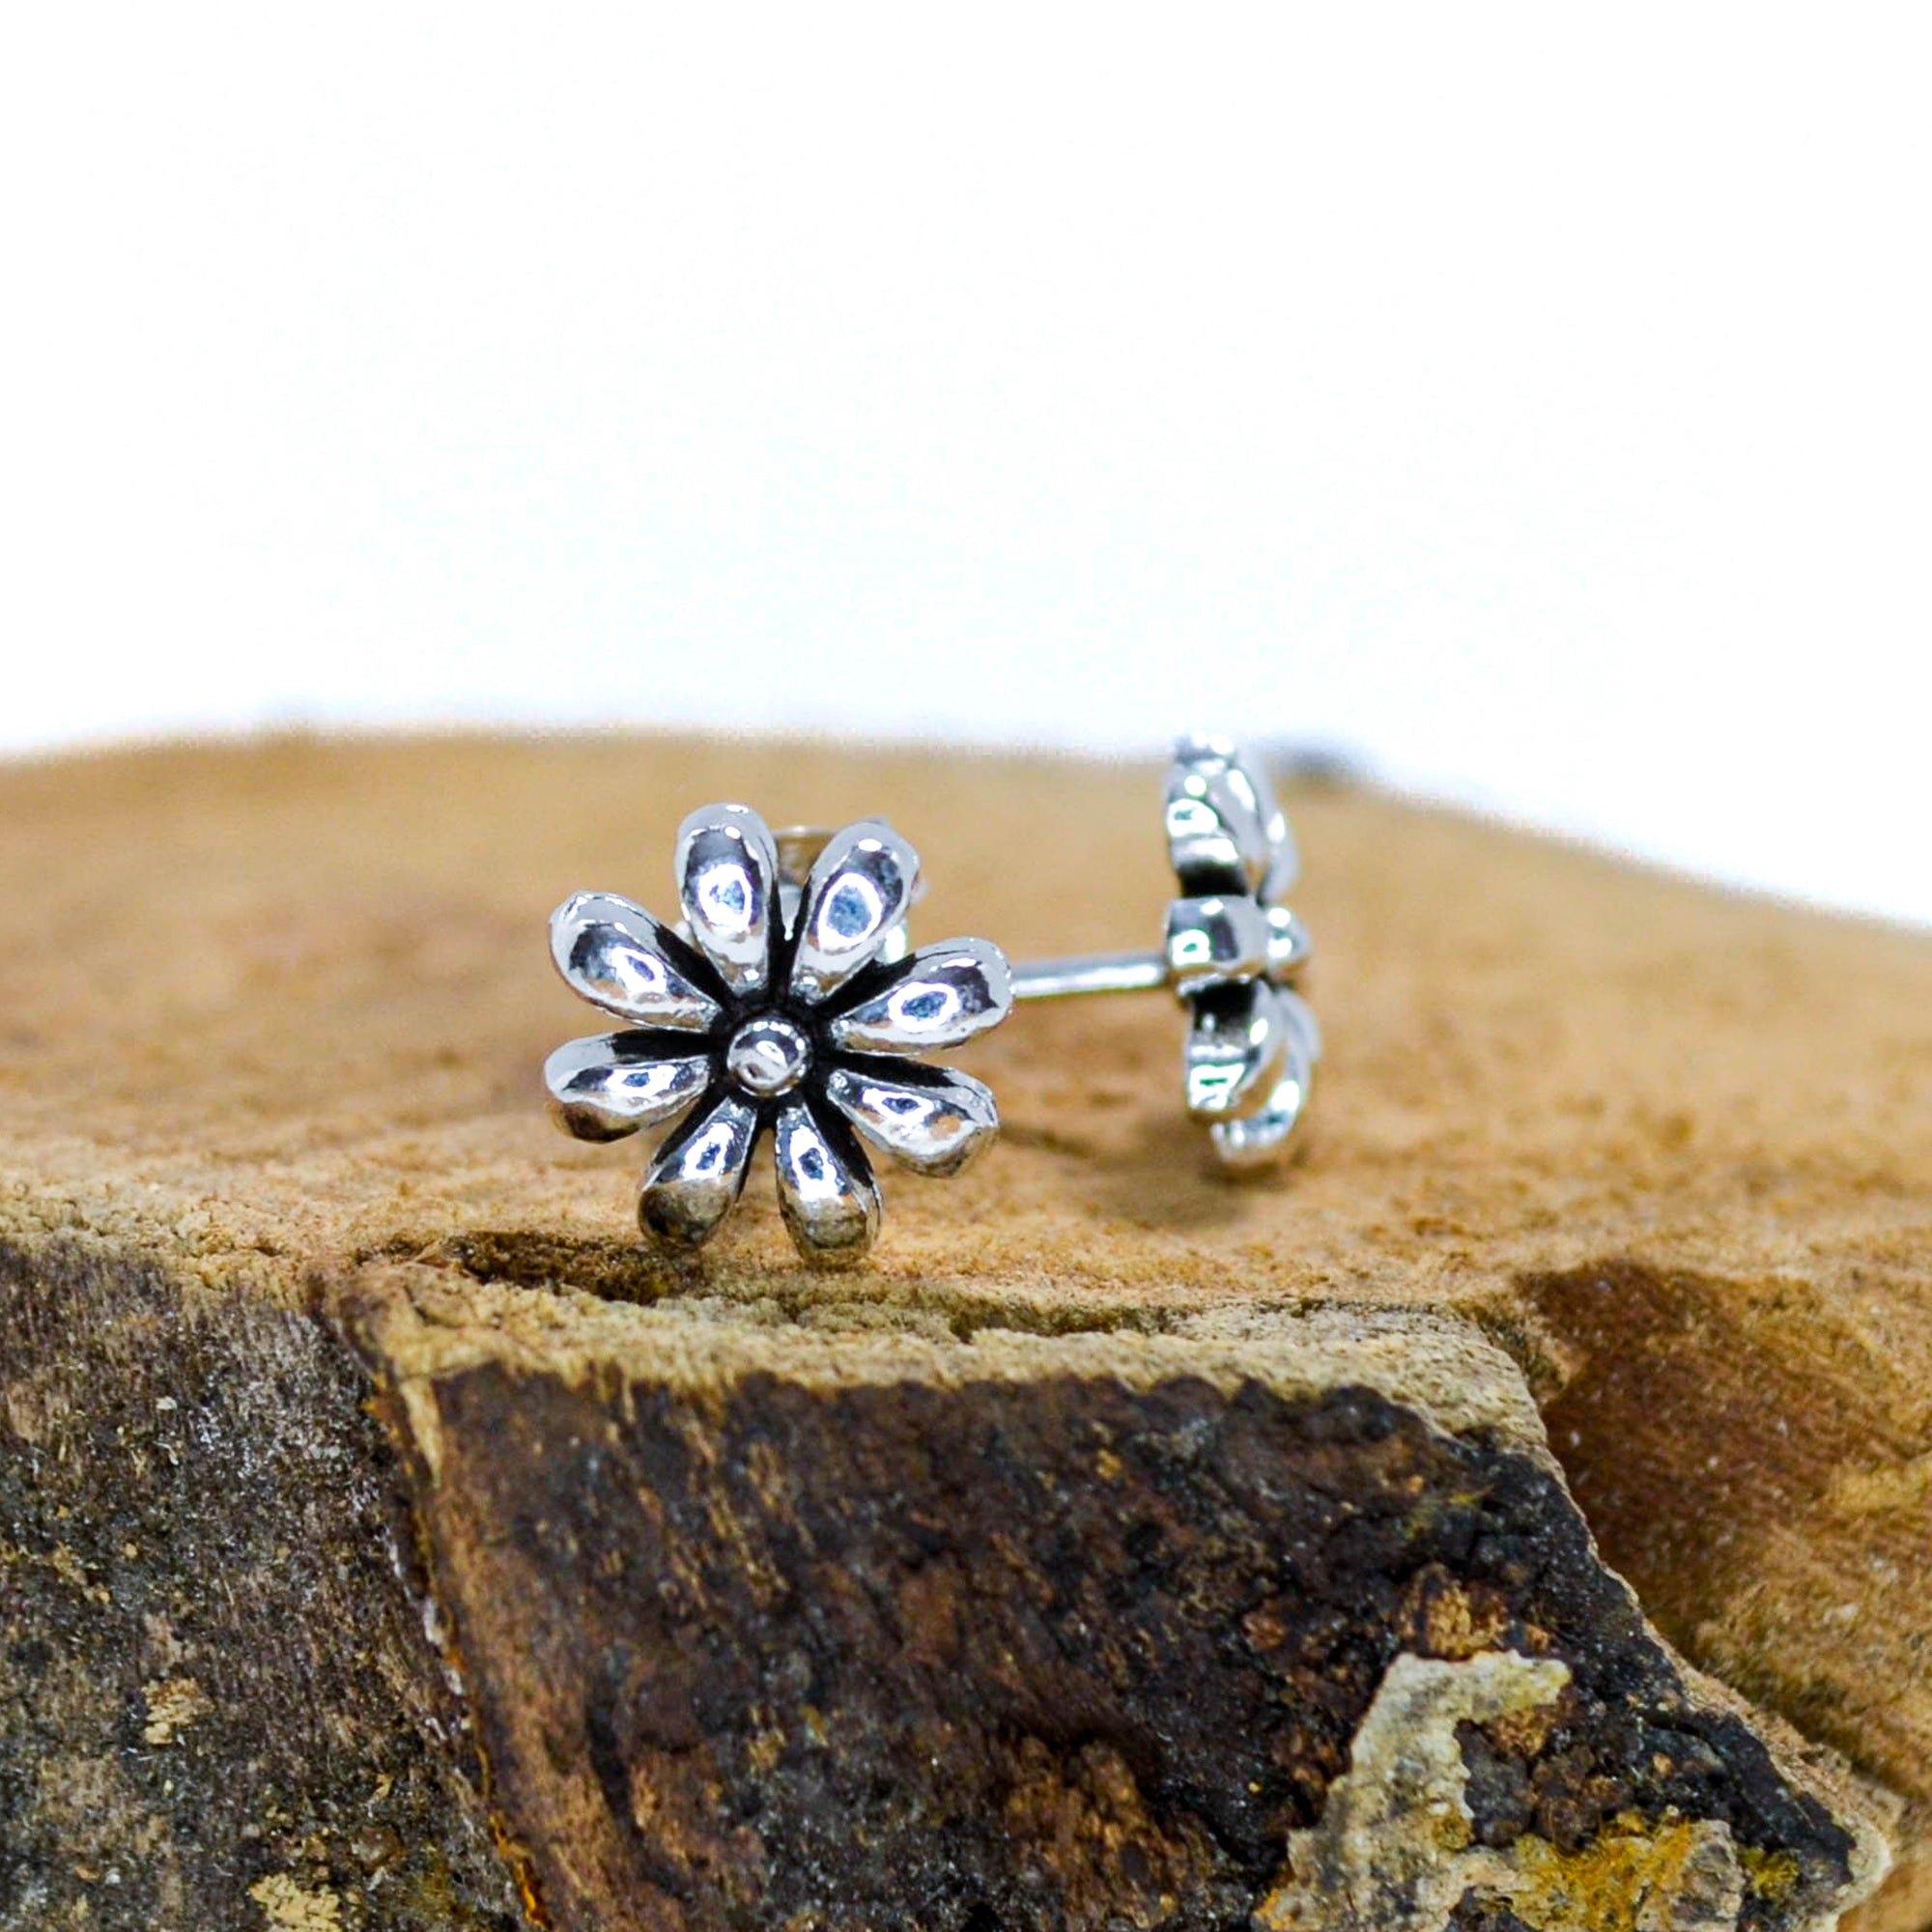 Small silver floral studs sitting on wood